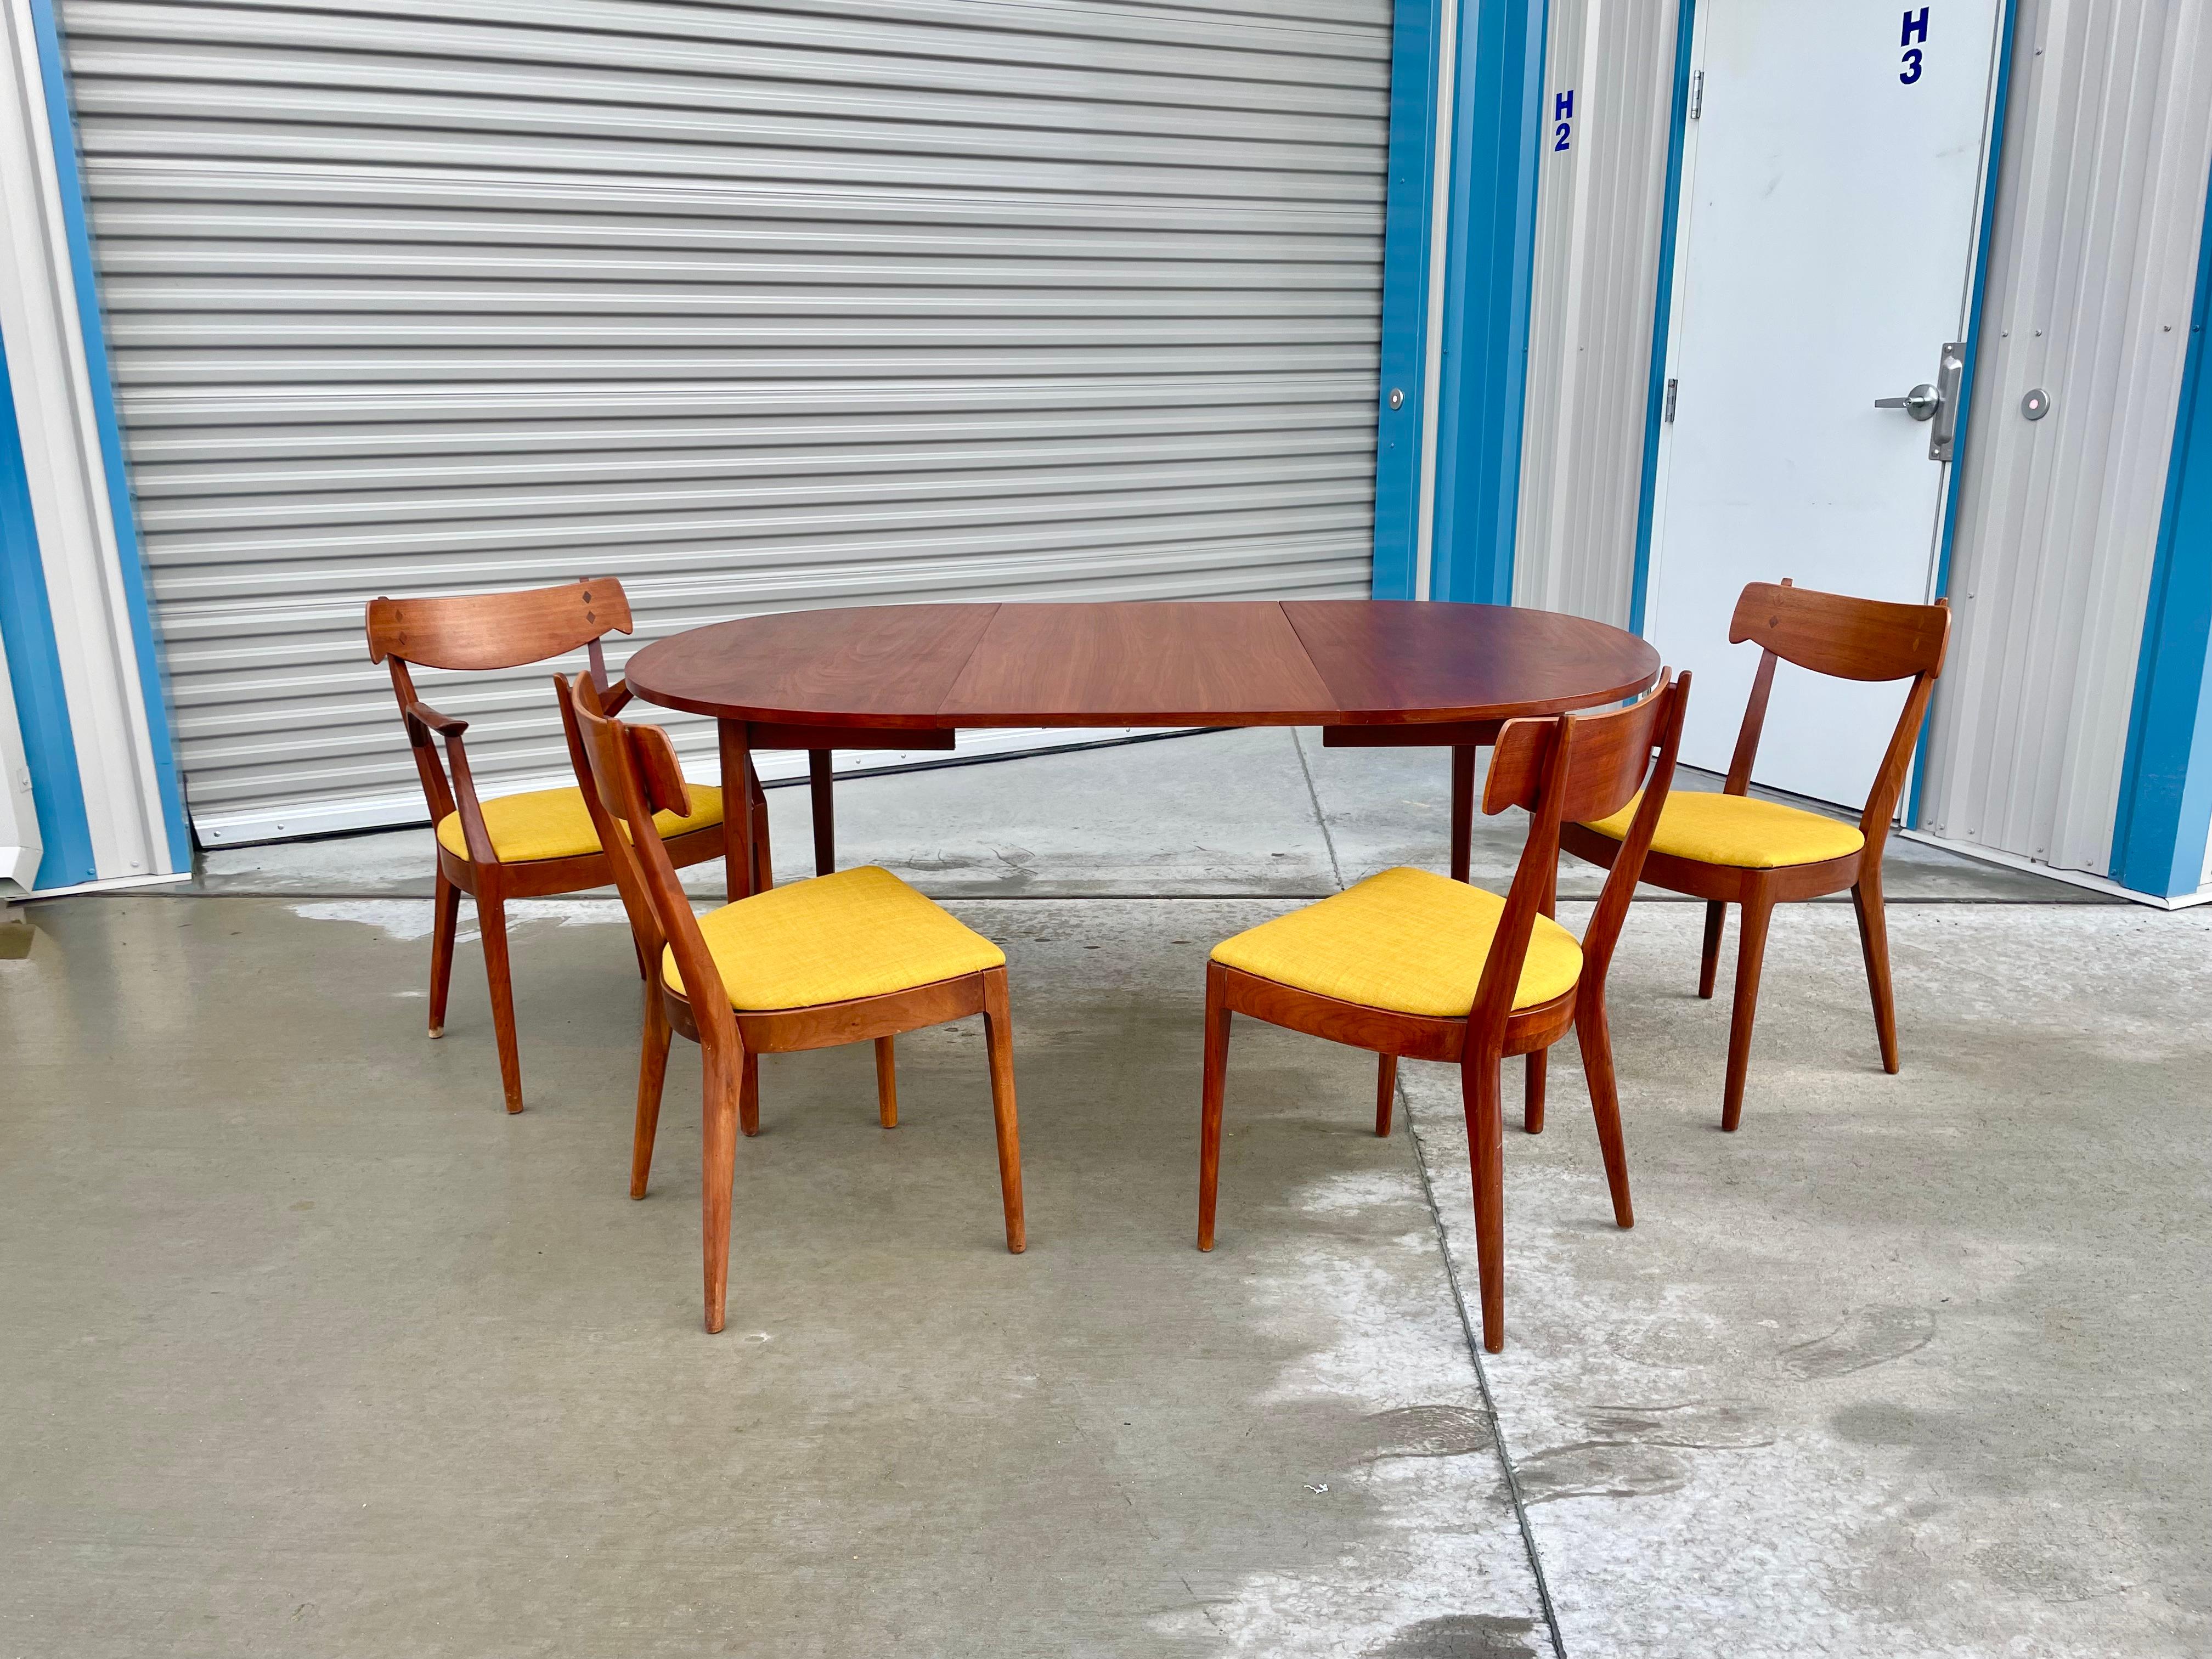 Midcentury dining room set was designed by Kipp Stewart and manufactured by Drexel in the United States circa 1950s. This beautiful dining room set features a dining table with one leaf extension creating more space for you and your guest. The set